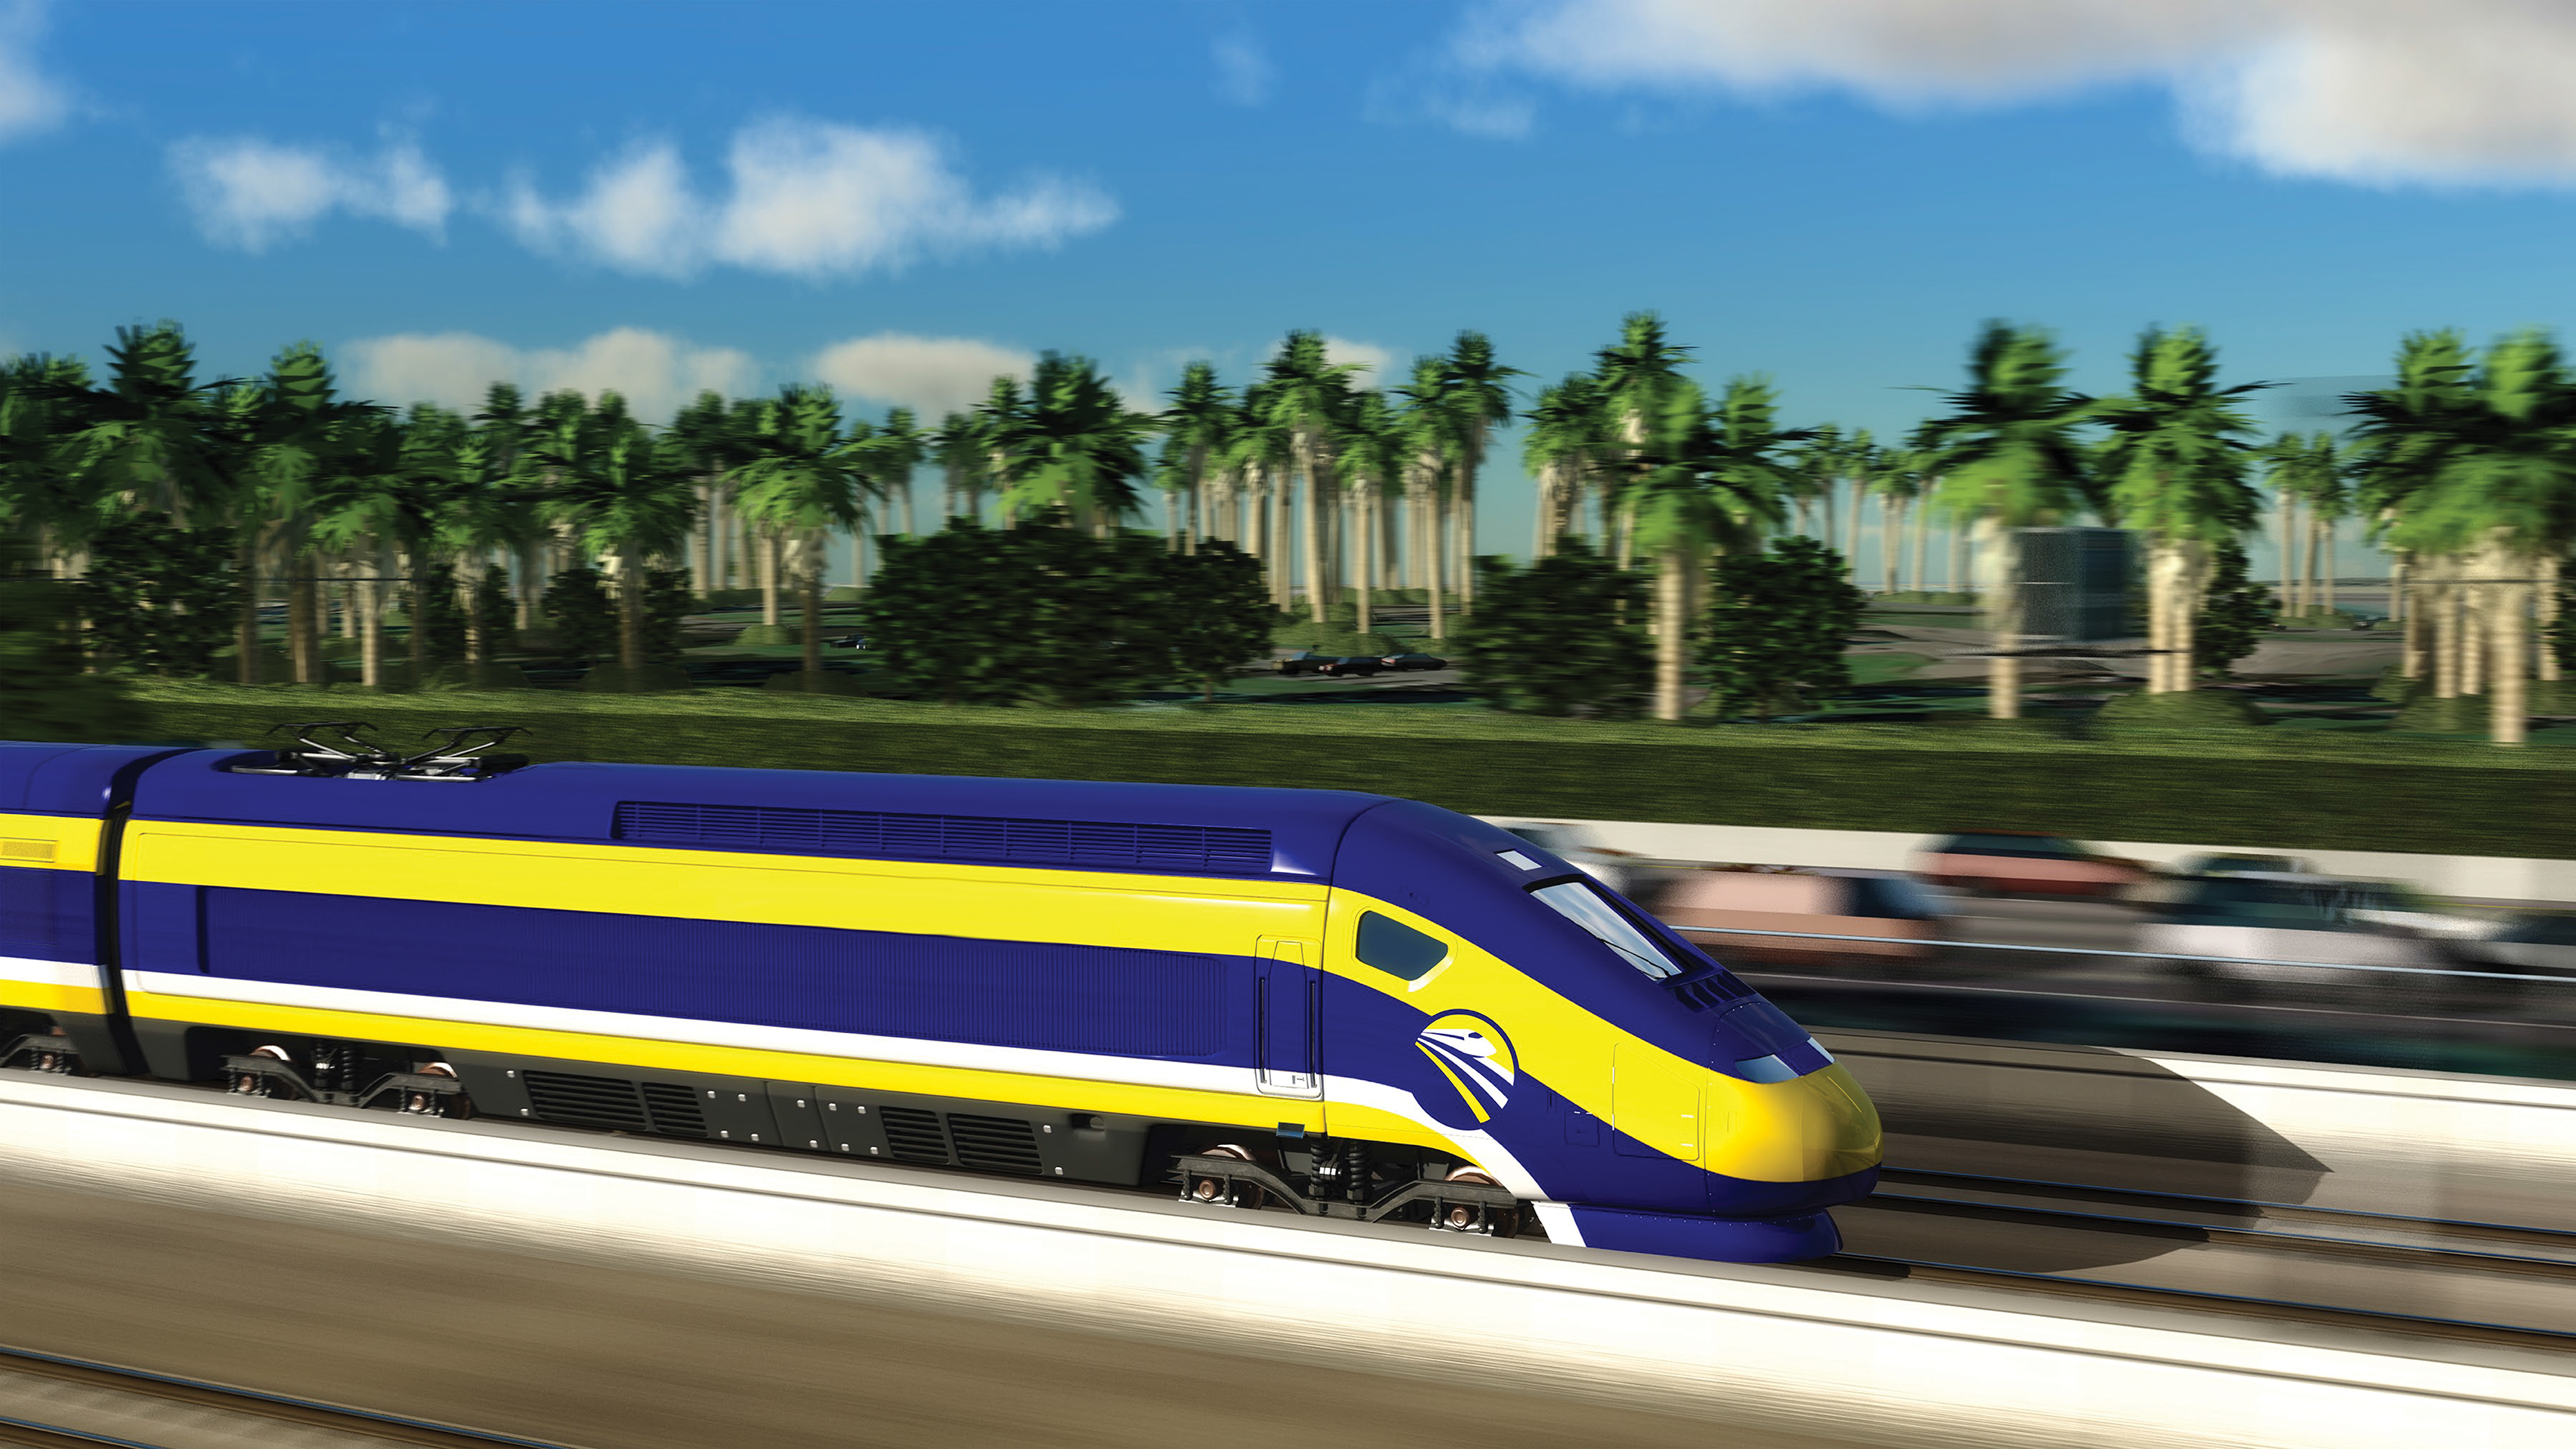 An artist's conception of the California High-Speed Rail. (Credit: California High-Speed Rail)